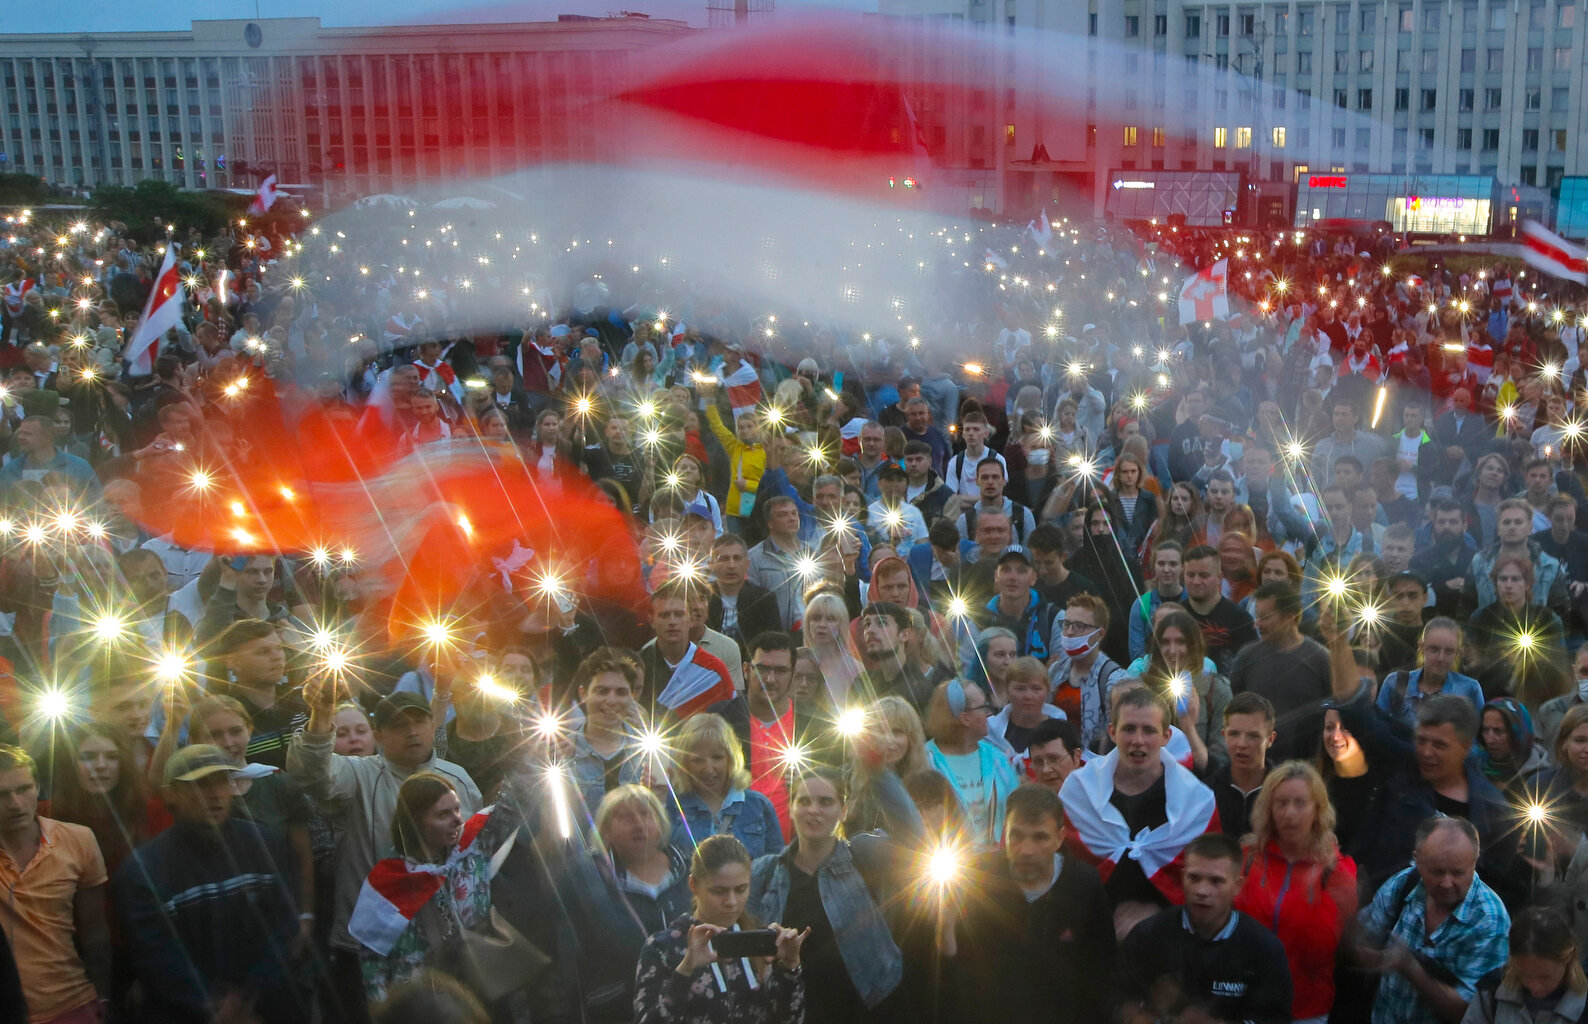  Belarusian opposition supporters activate the lights on their phones and wave old Belarusian national flags during a protest rally in front of the government building at Independent Square in Minsk, Belarus, Wednesday, Aug. 19, 2020. (AP Photo/Dmitr